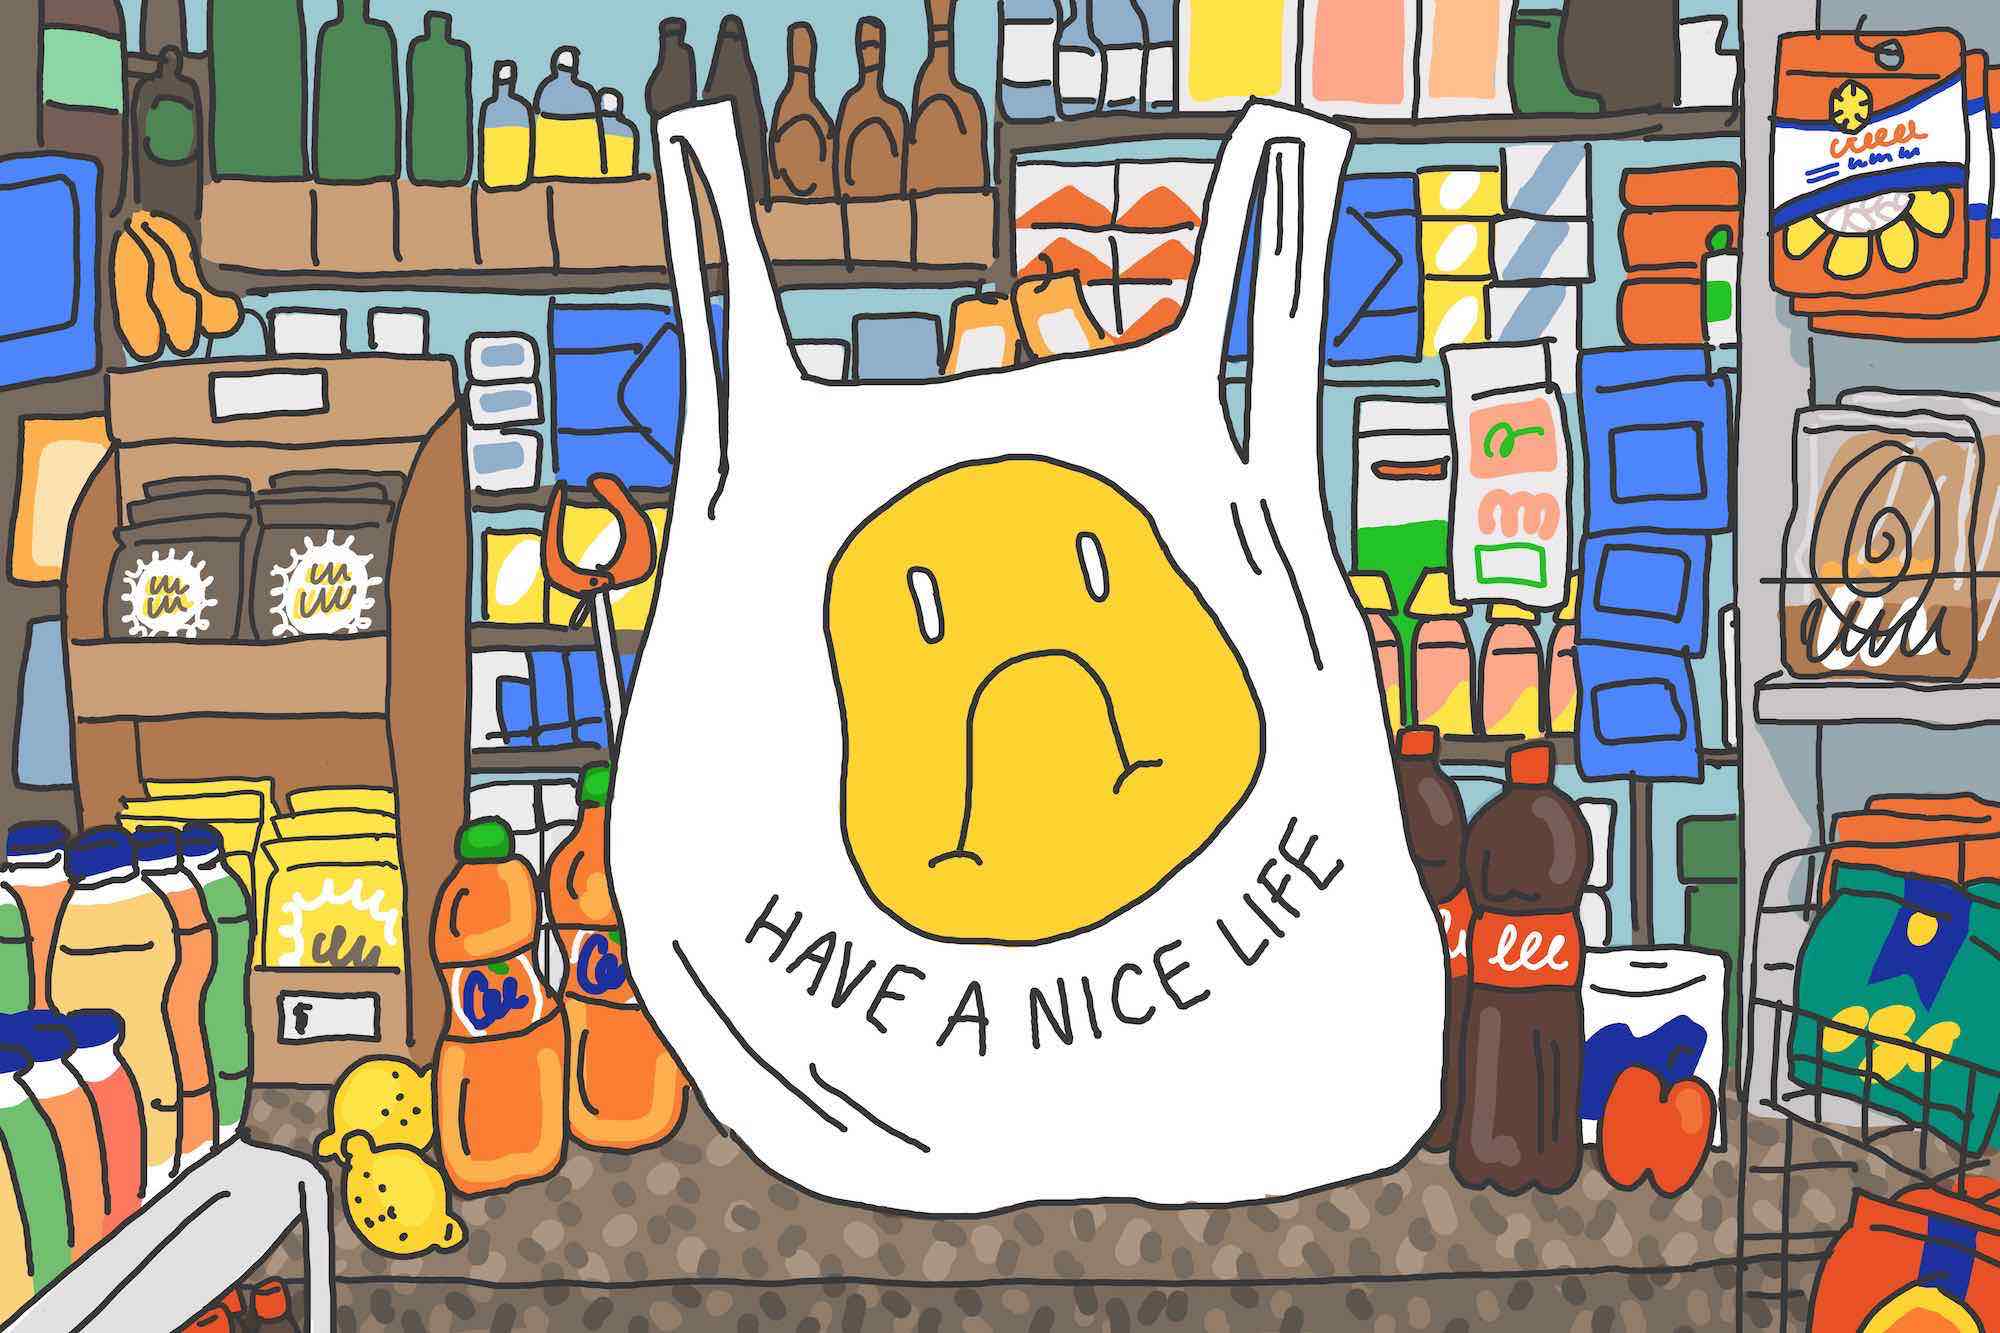 A colorful illustration of a bodega counter. A bag sits on the counter that has the classic "have a nice day" smiley face on it, but instead it's a sad face, with the words "have a nice life" below it.